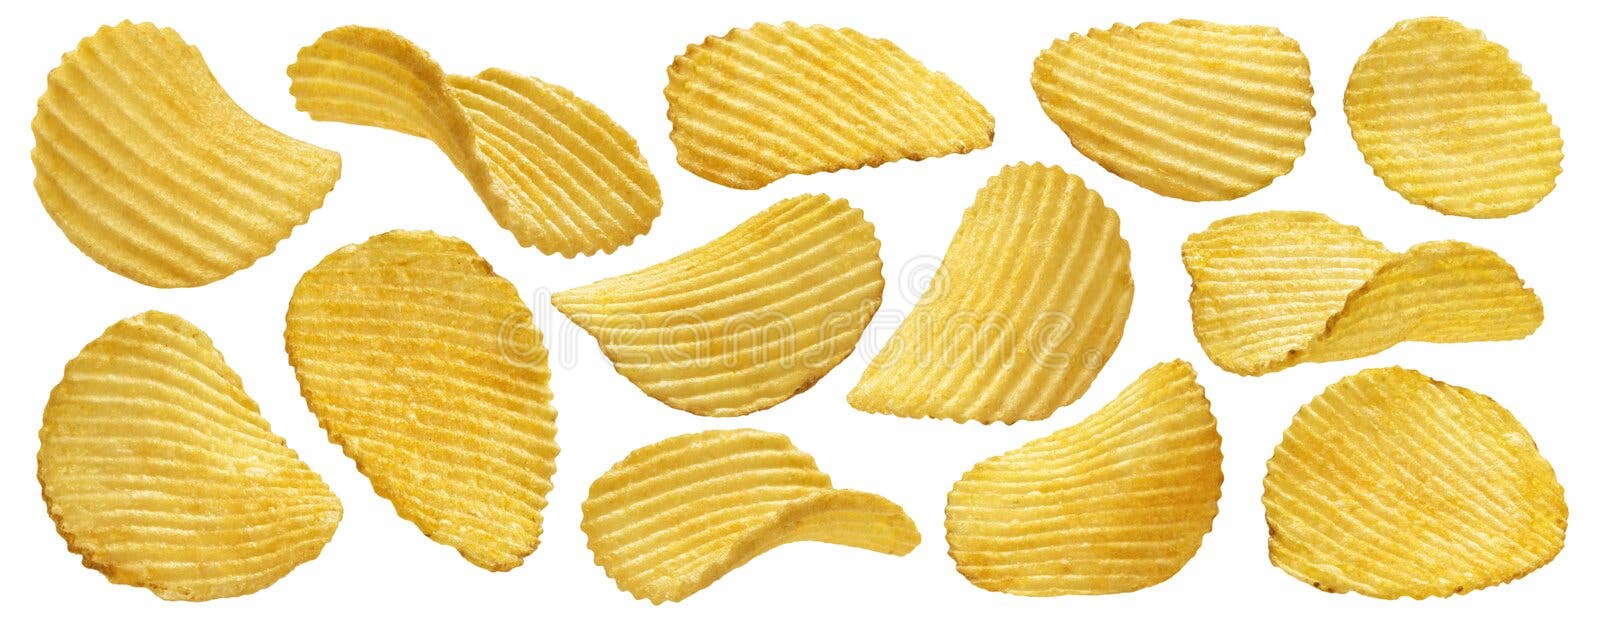 https://thumbs.dreamstime.com/b/ridged-potato-chips-isolated-white-background-clipping-path-collection-215521058.jpg?w=1600